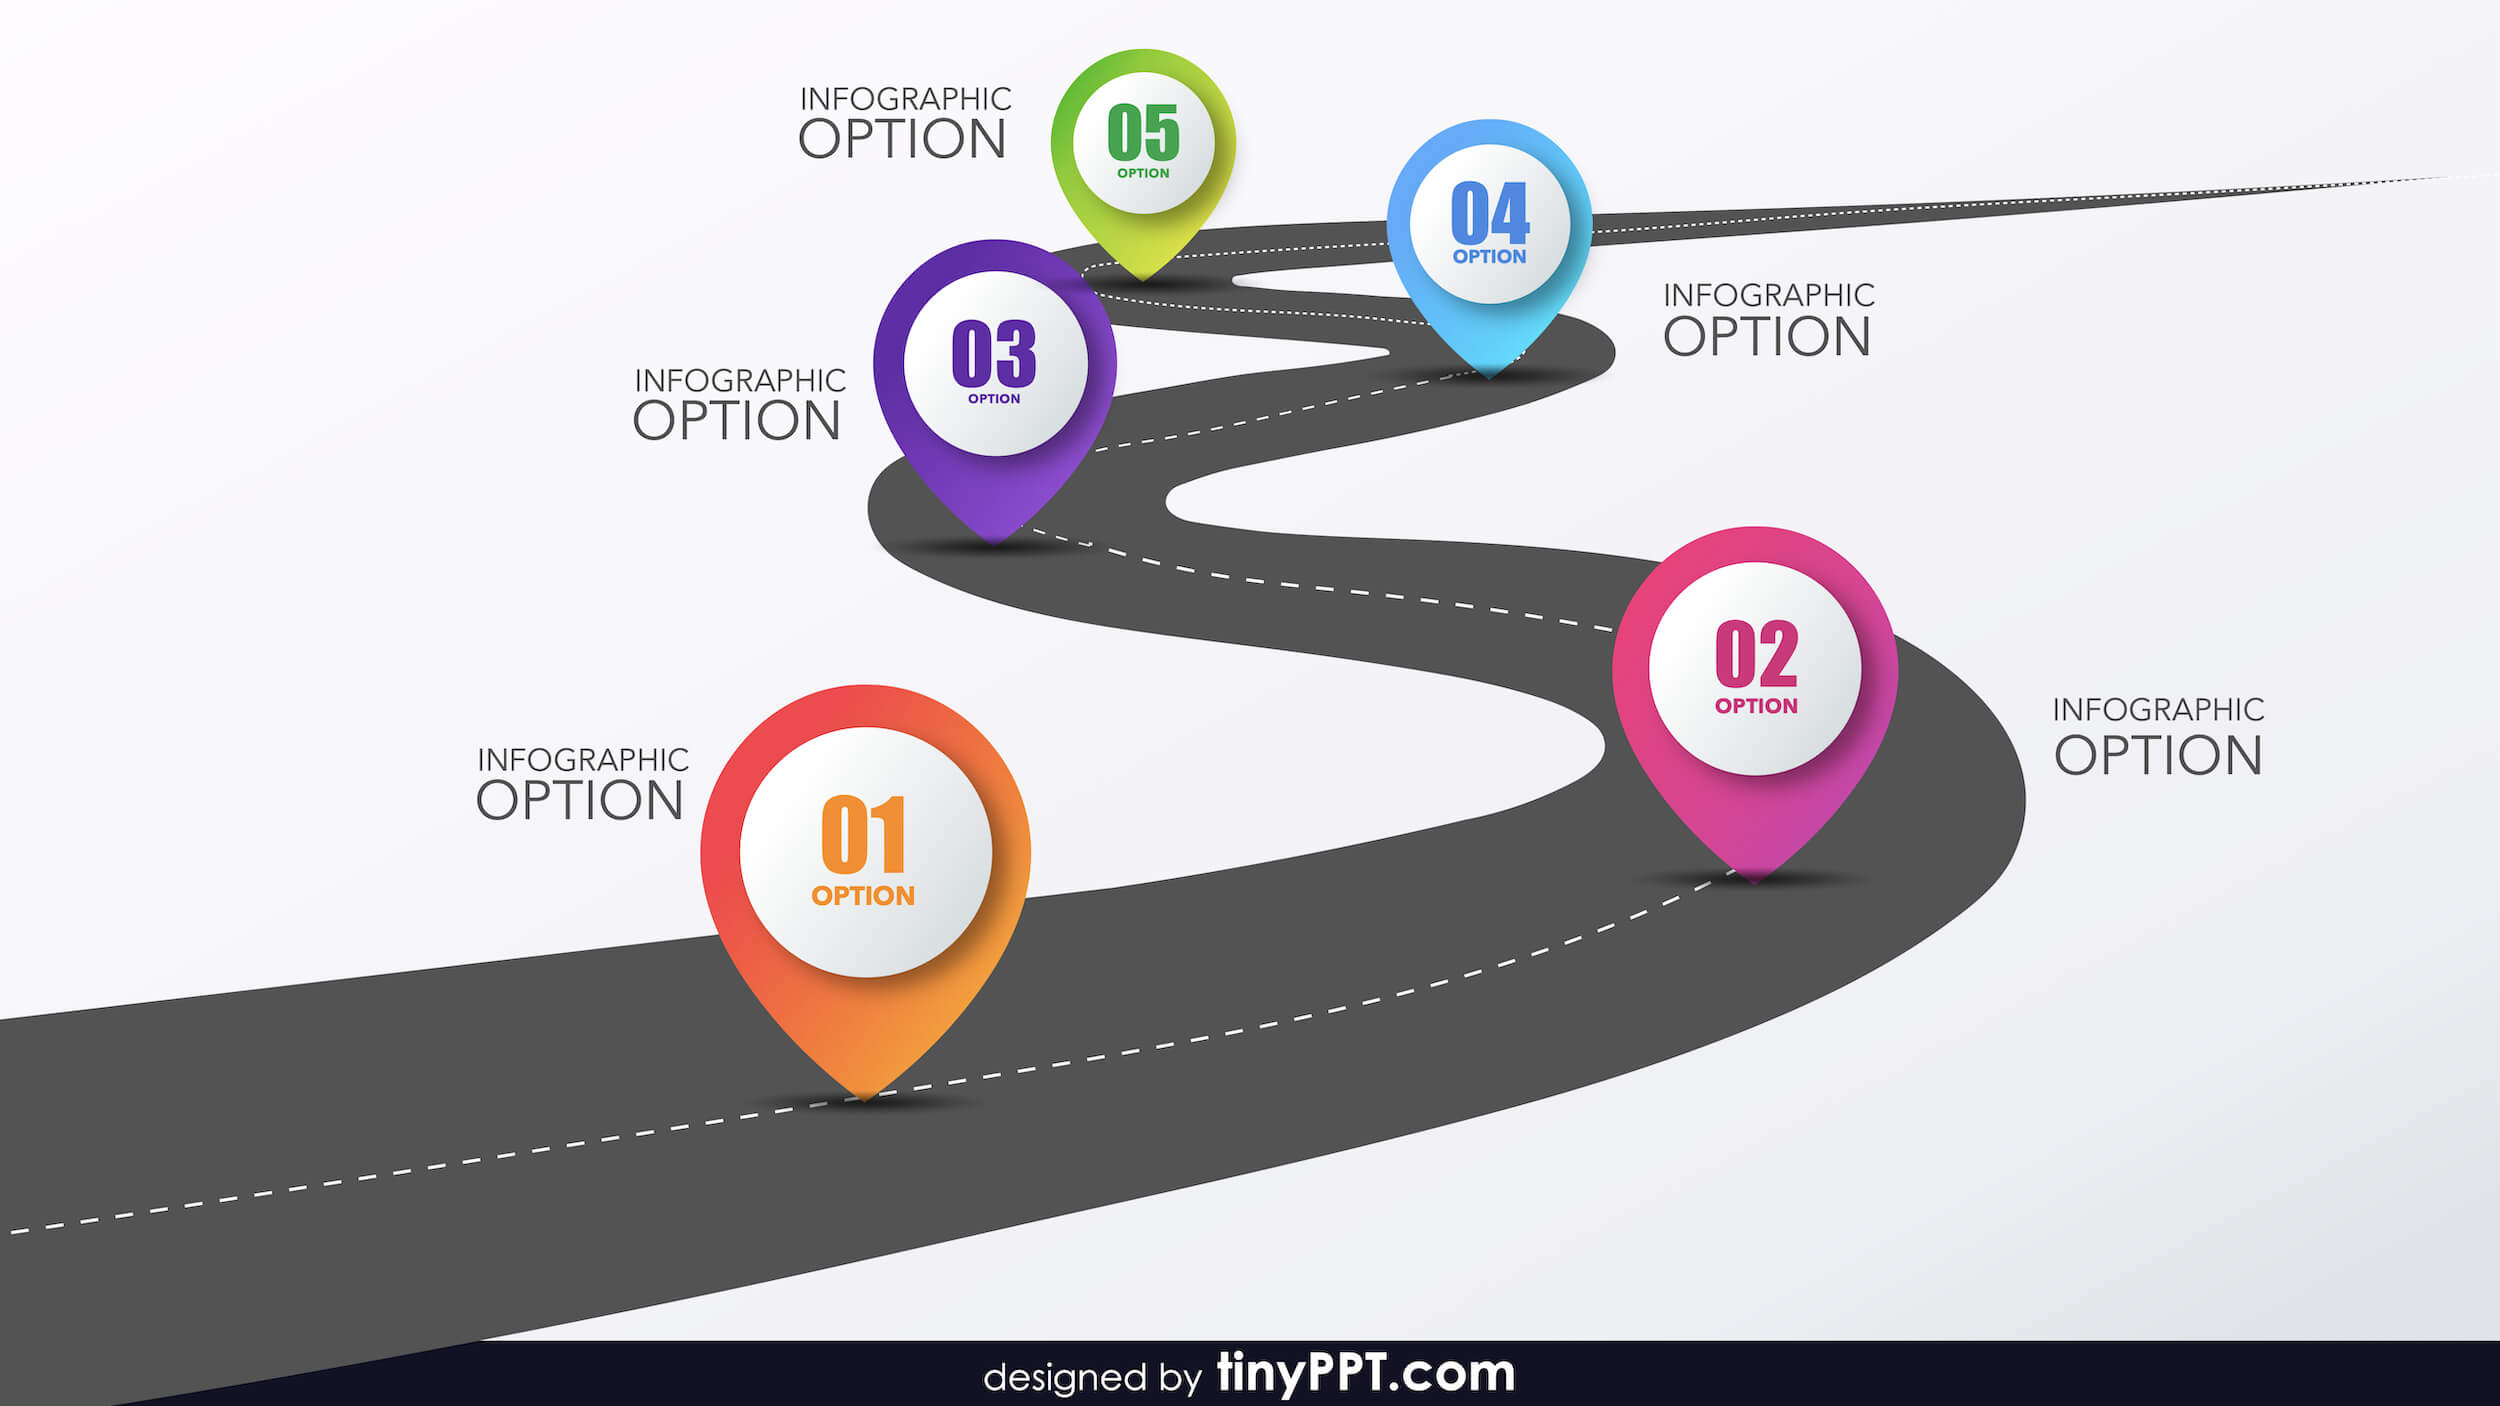 007 Powerpoint Roadmap Template Road Map Frightening Ideas For Blank Road Map Template